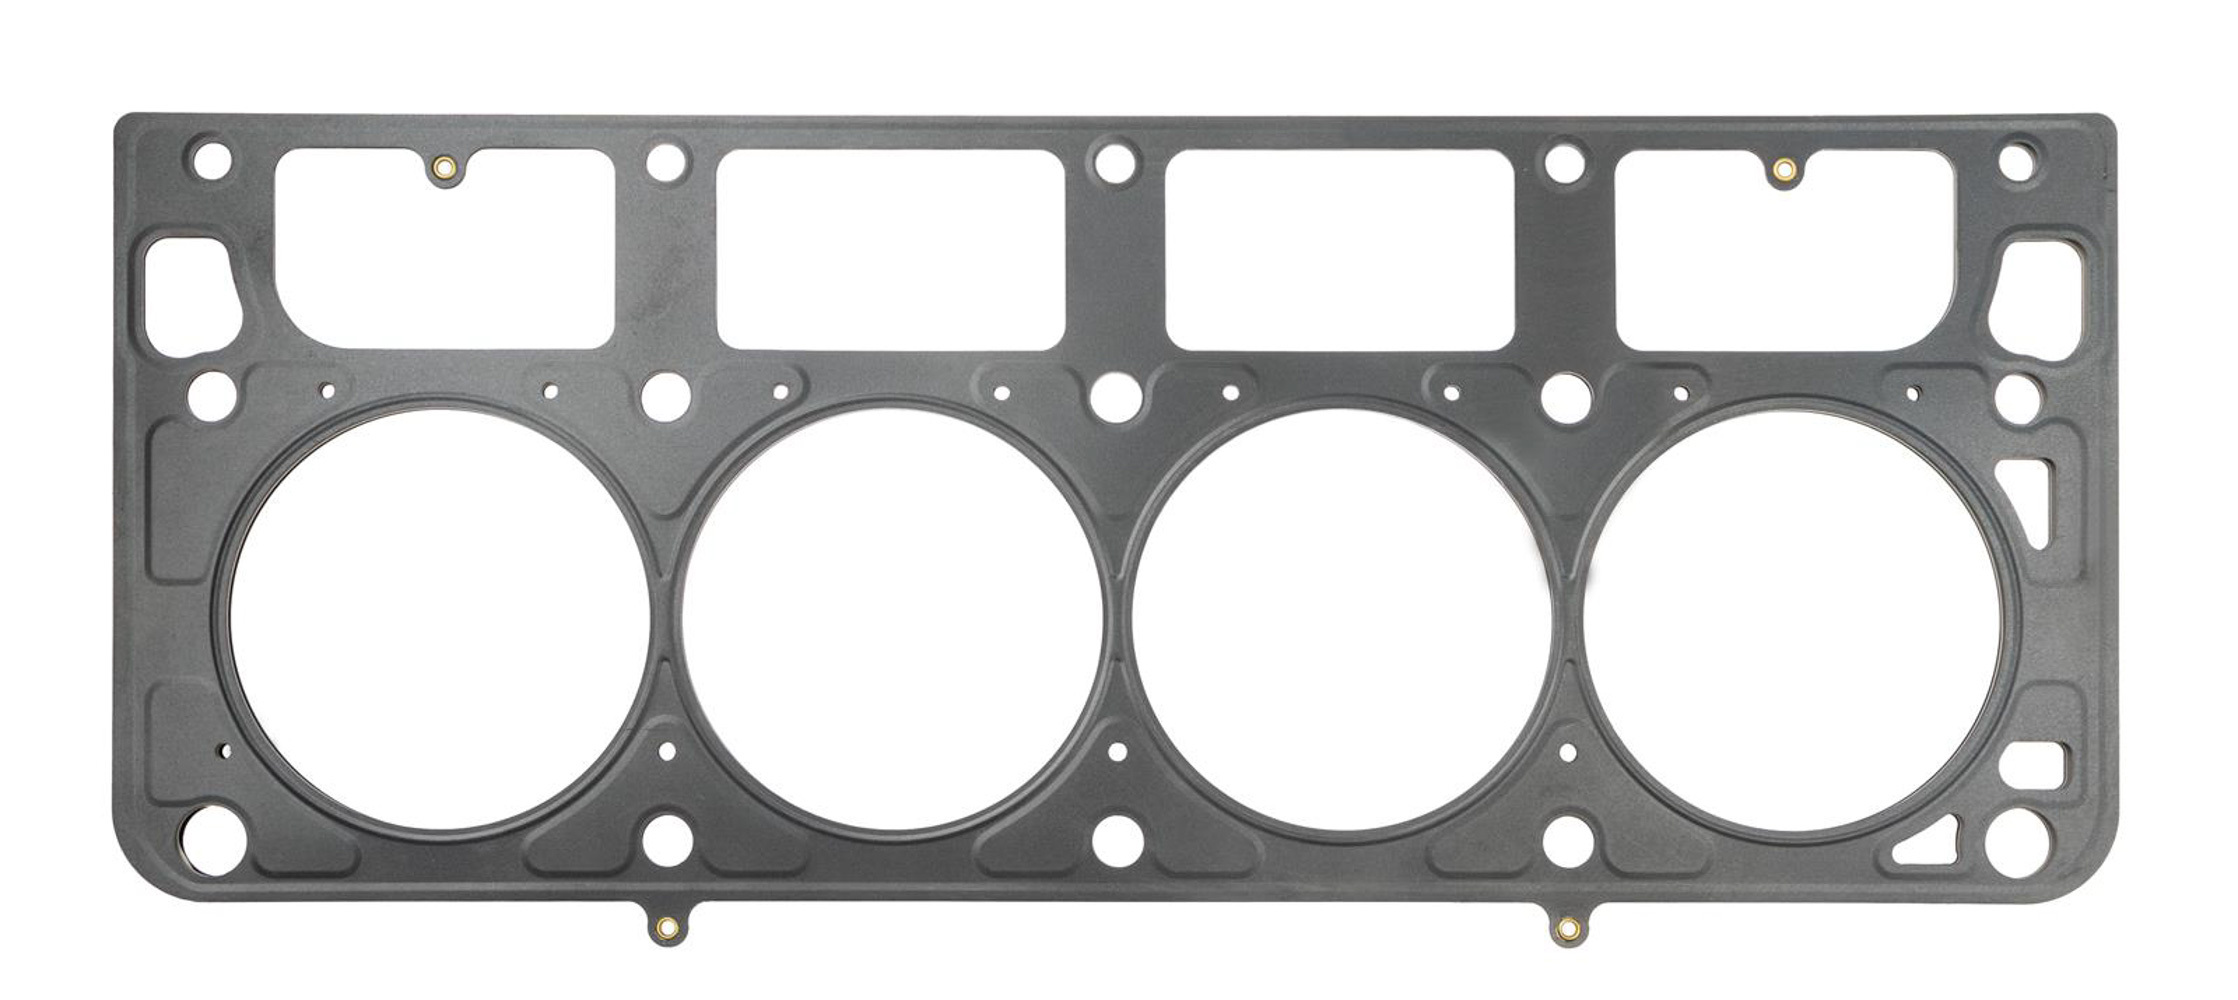 SCE Gaskets M201351 - Cylinder Head Gasket, MLS Spartan, 4.130 in Bore, 0.051 in Compression Thickness, Multi-Layer Steel, GM LS-Series, Each